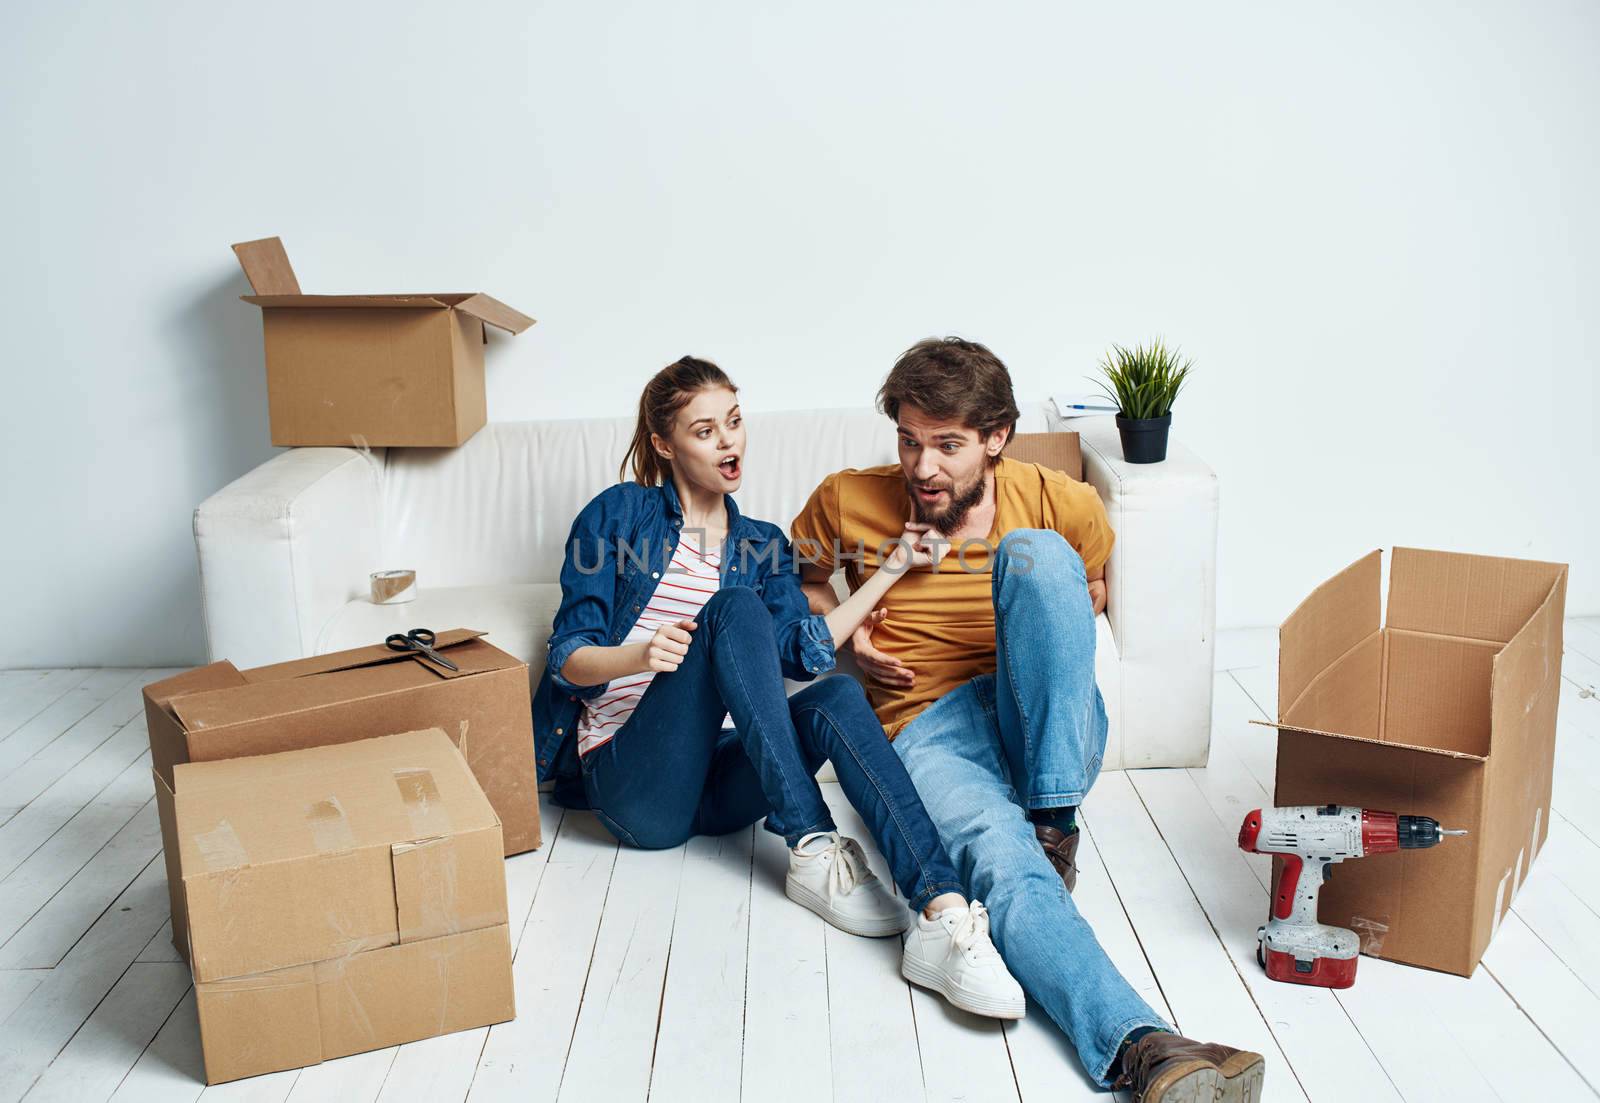 Emotional man and woman with cardboard boxes on the floor having fun moving renovation work. High quality photo